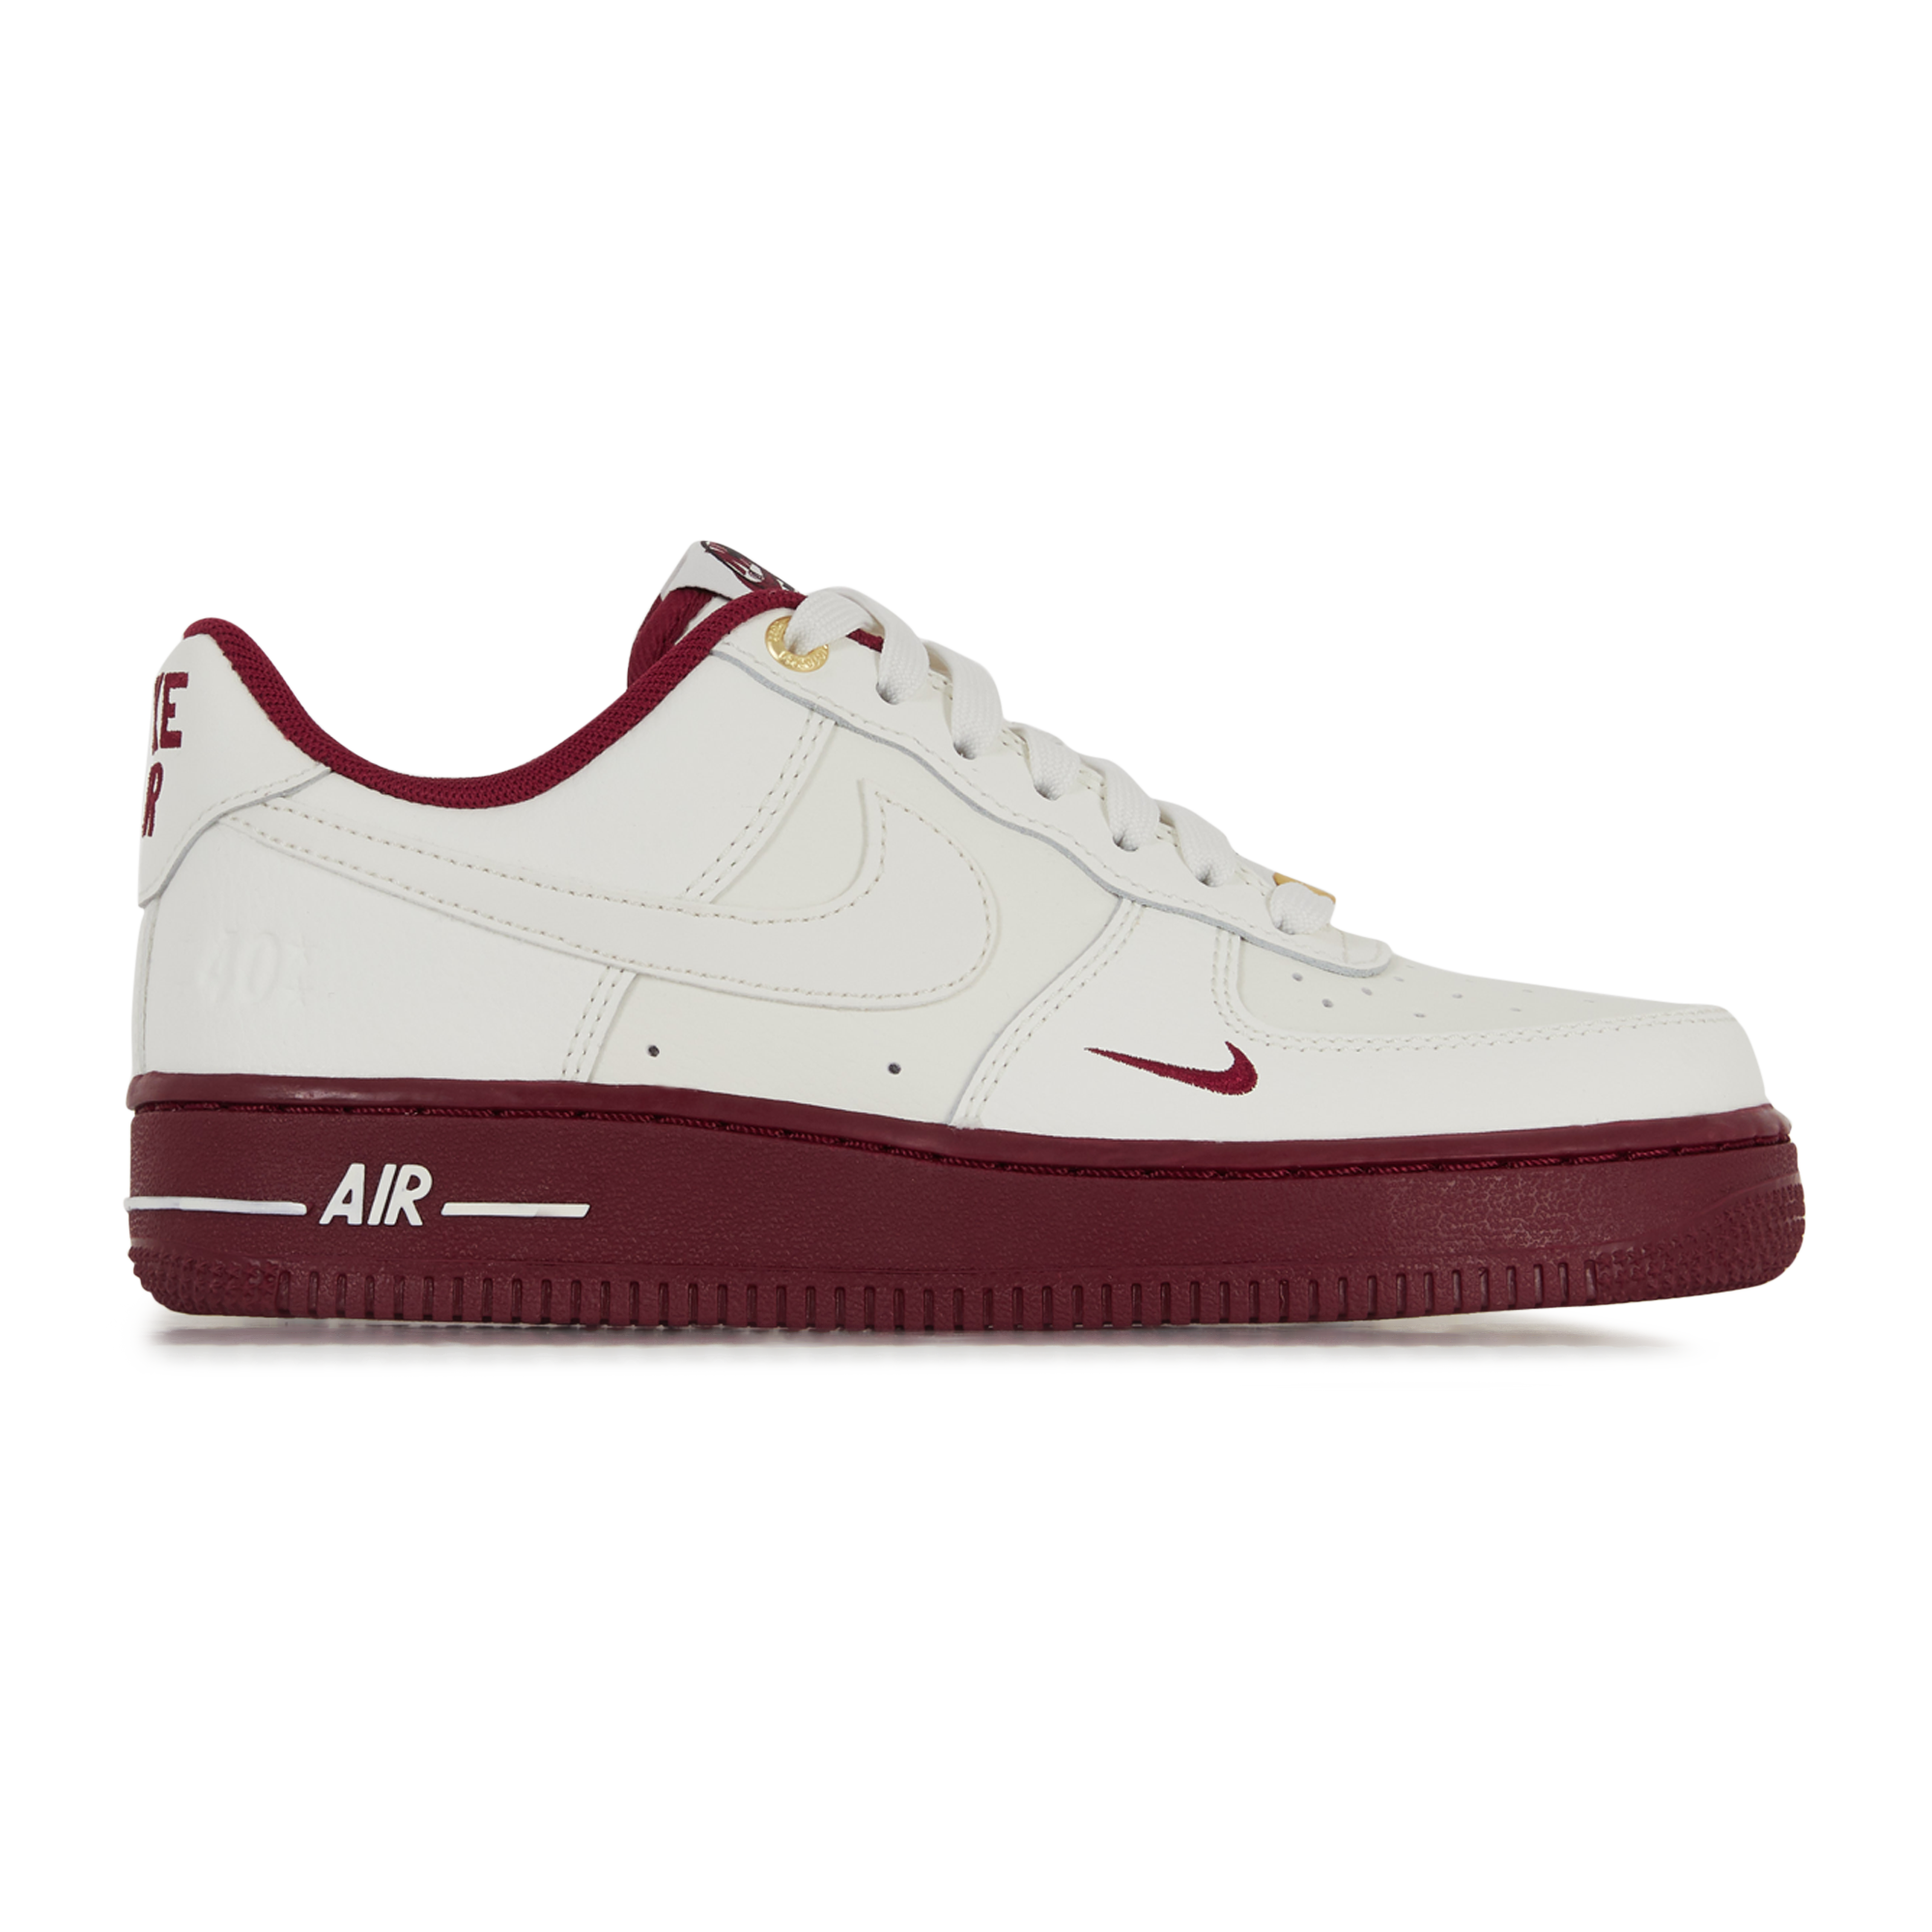 NIKE AIR 1 LOW 40TH ANNIVERSARY BEIGE/ROOD SNEAKERS | Courir.be